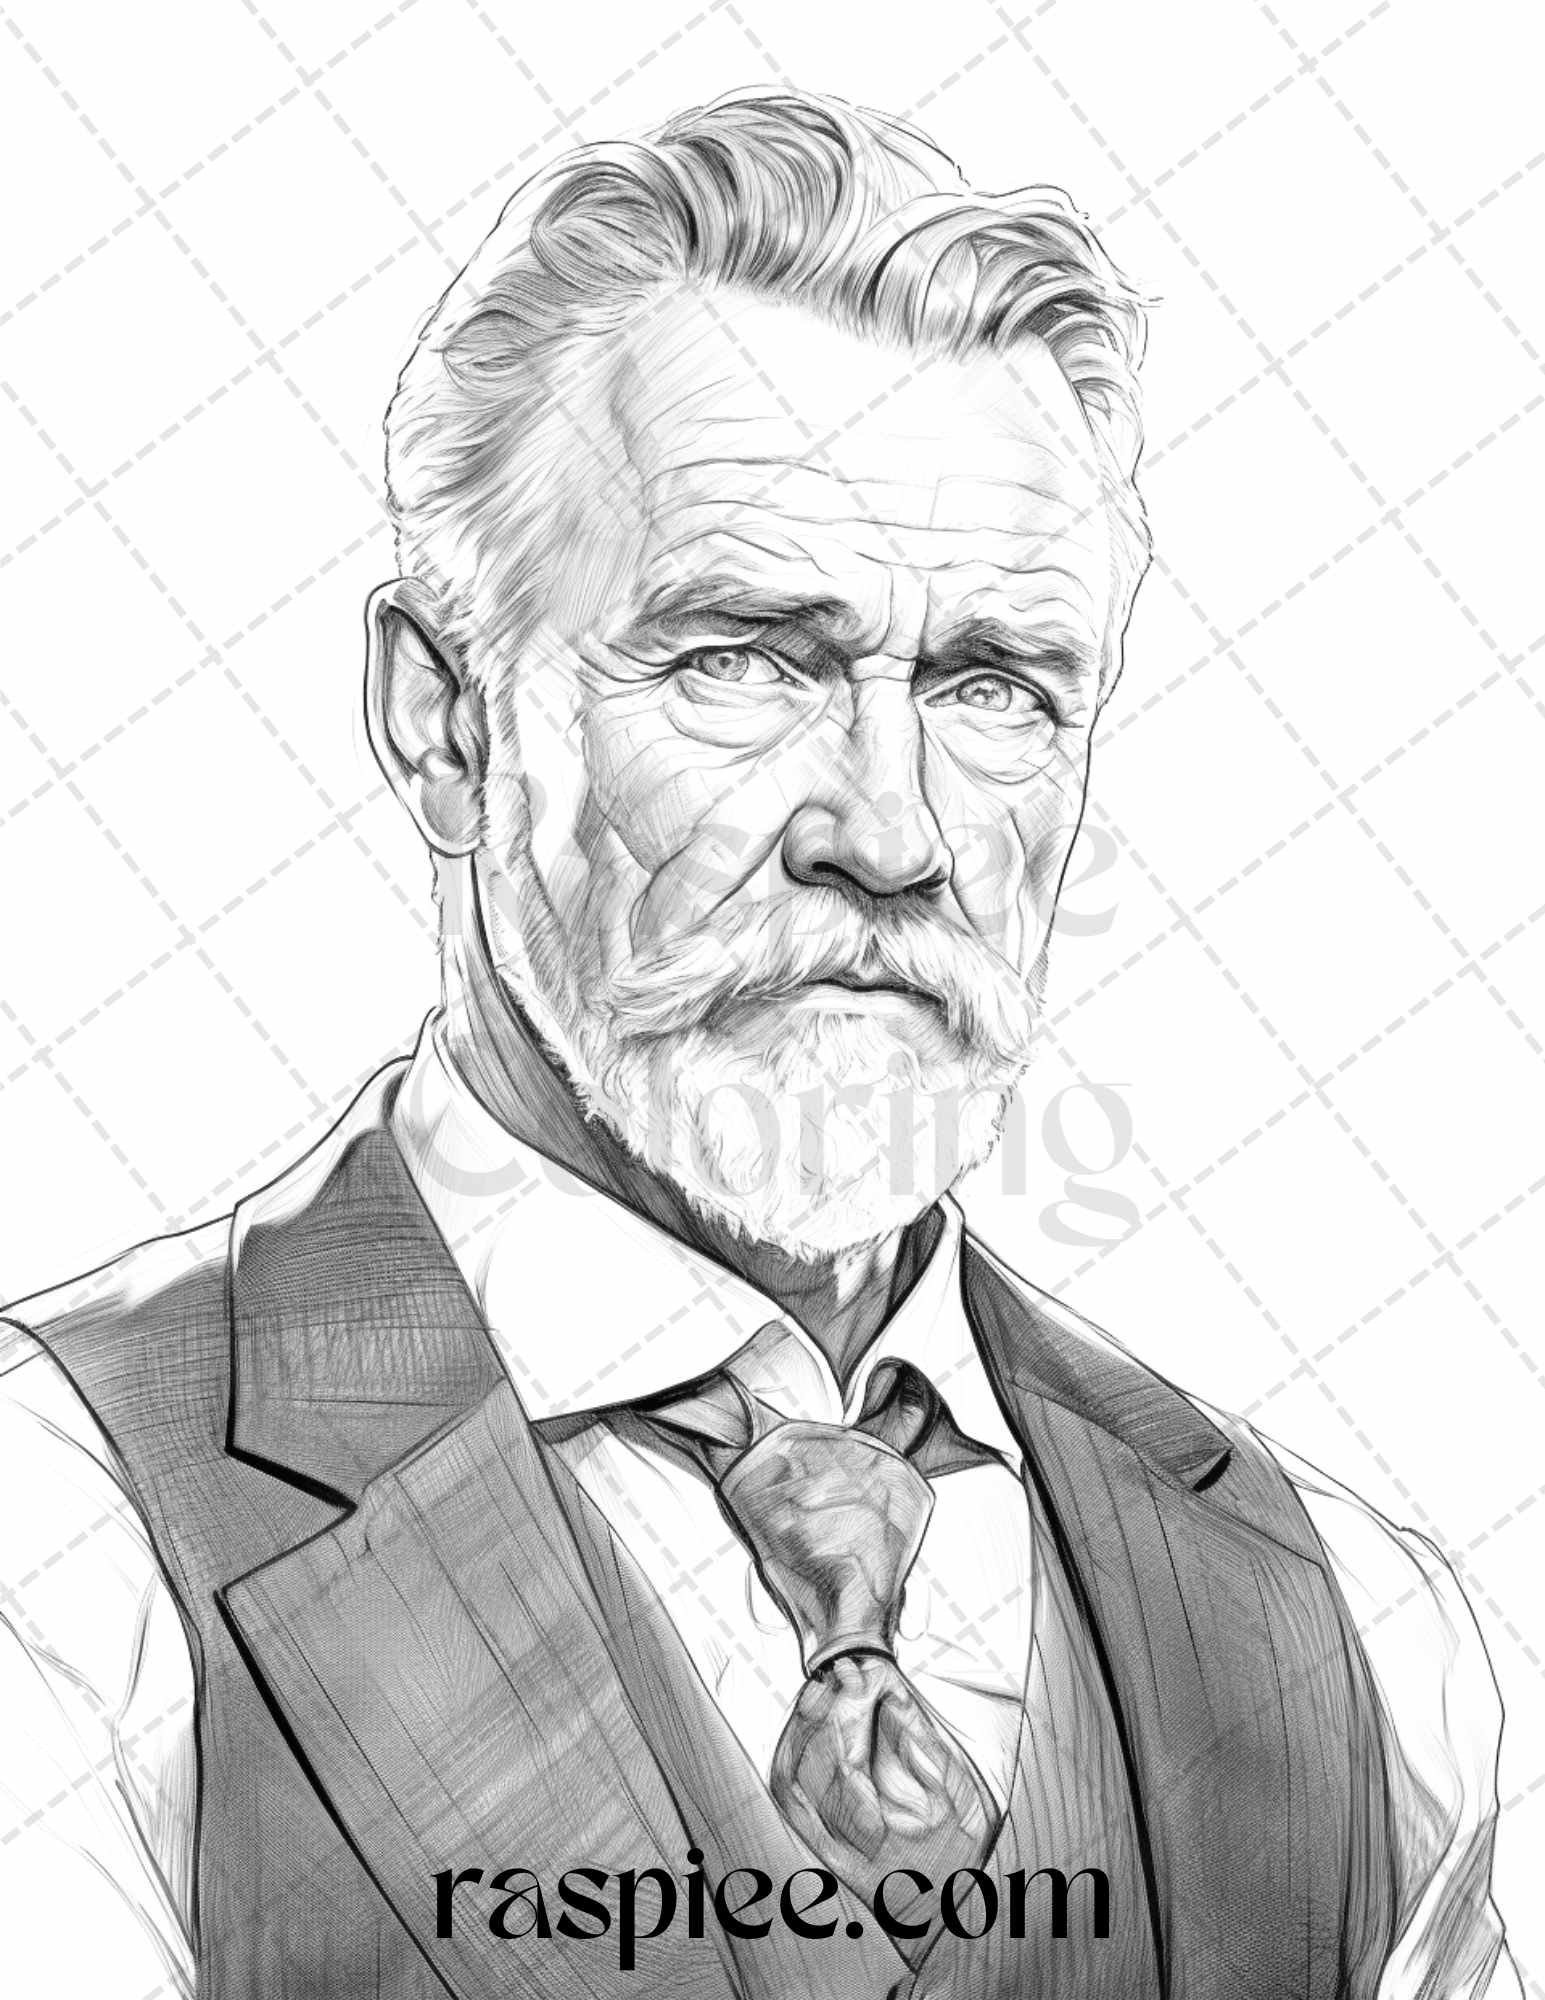 40 Vintage Gentleman Grayscale Coloring Pages Printable for Adults, PDF File Instant Download - raspiee